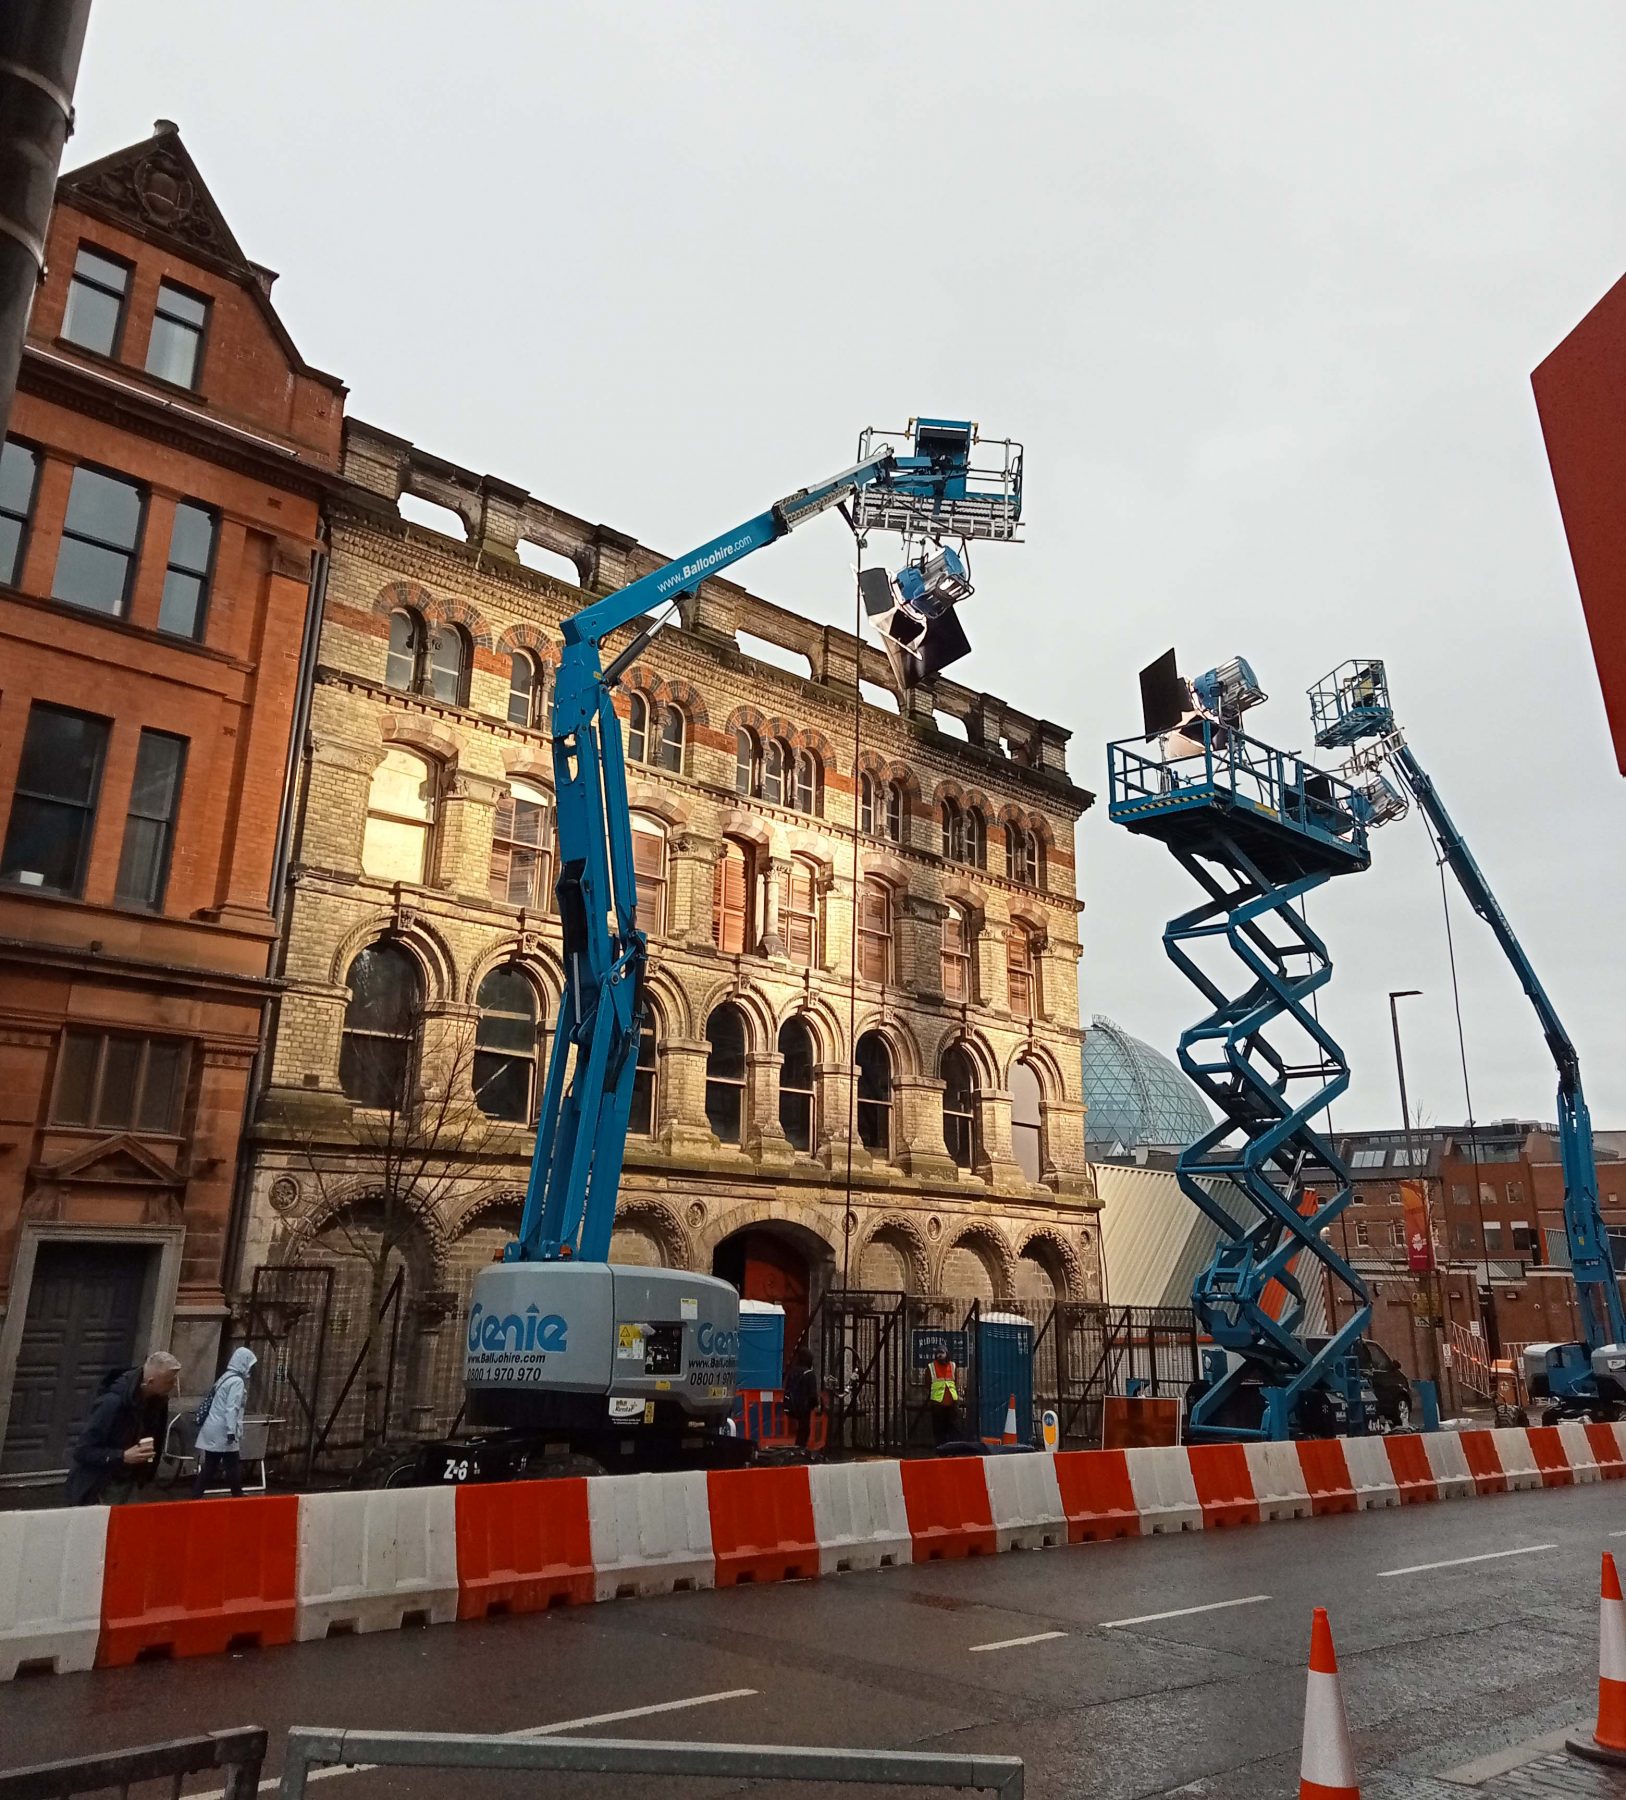 Large scissor lifts with lighting rigs directed onto a Victorian Brick Façade.